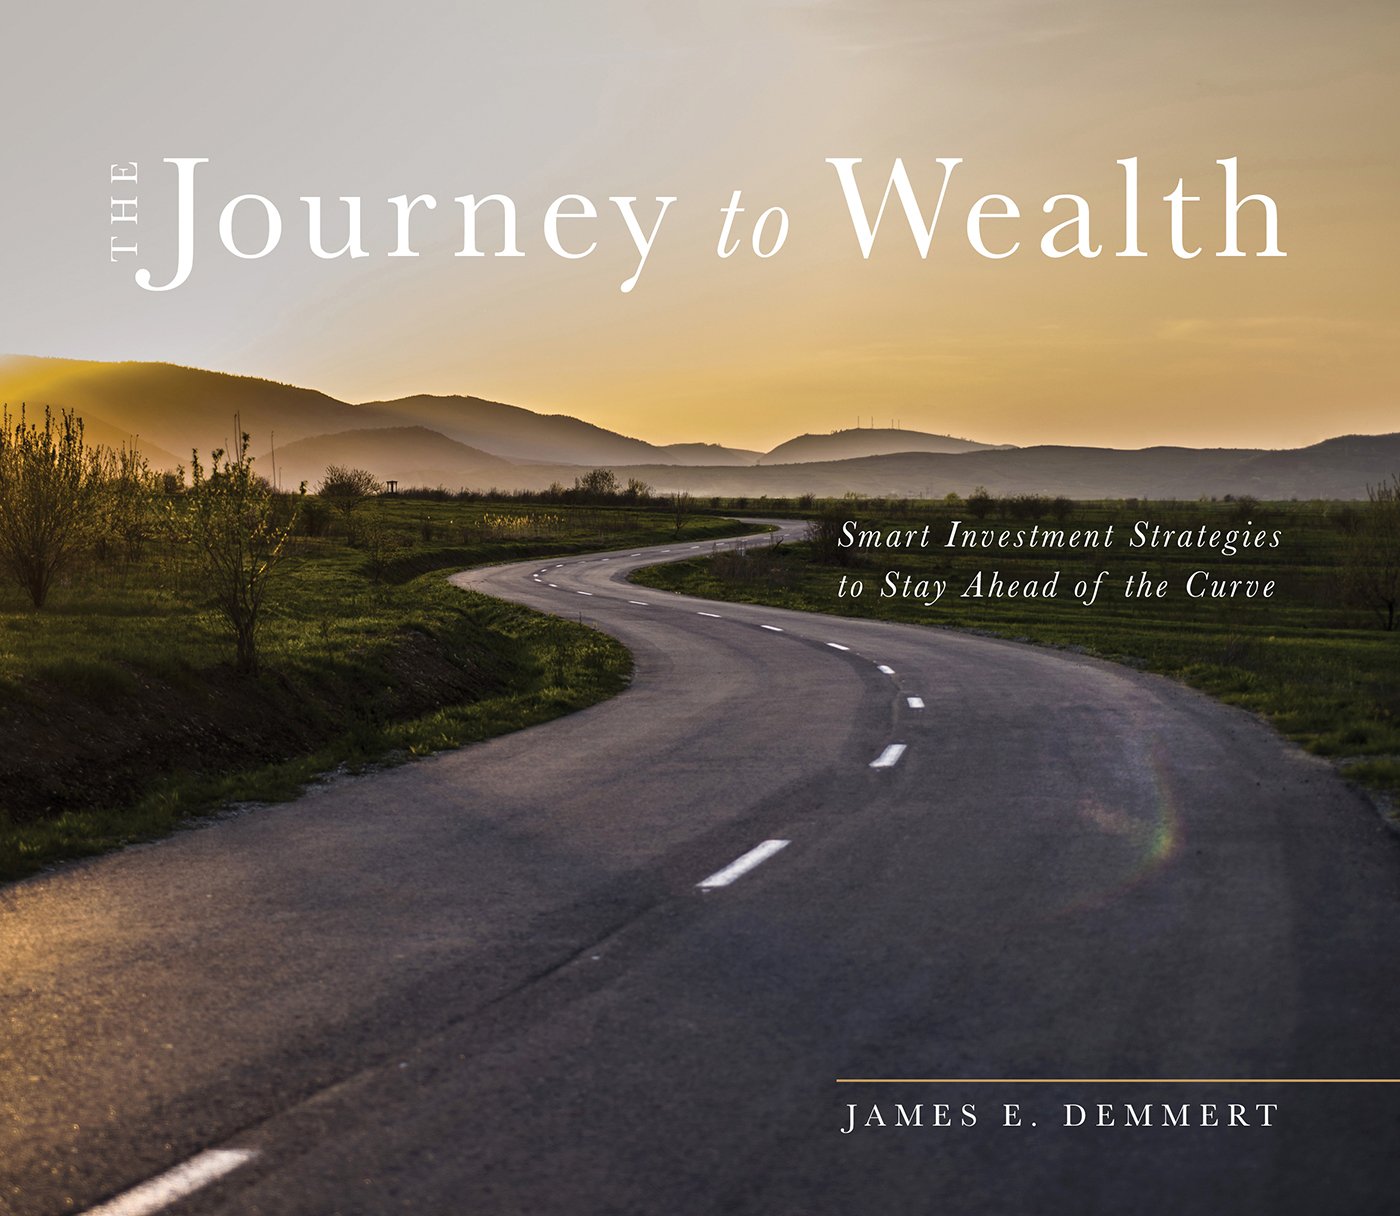 Journey to wealth book cover